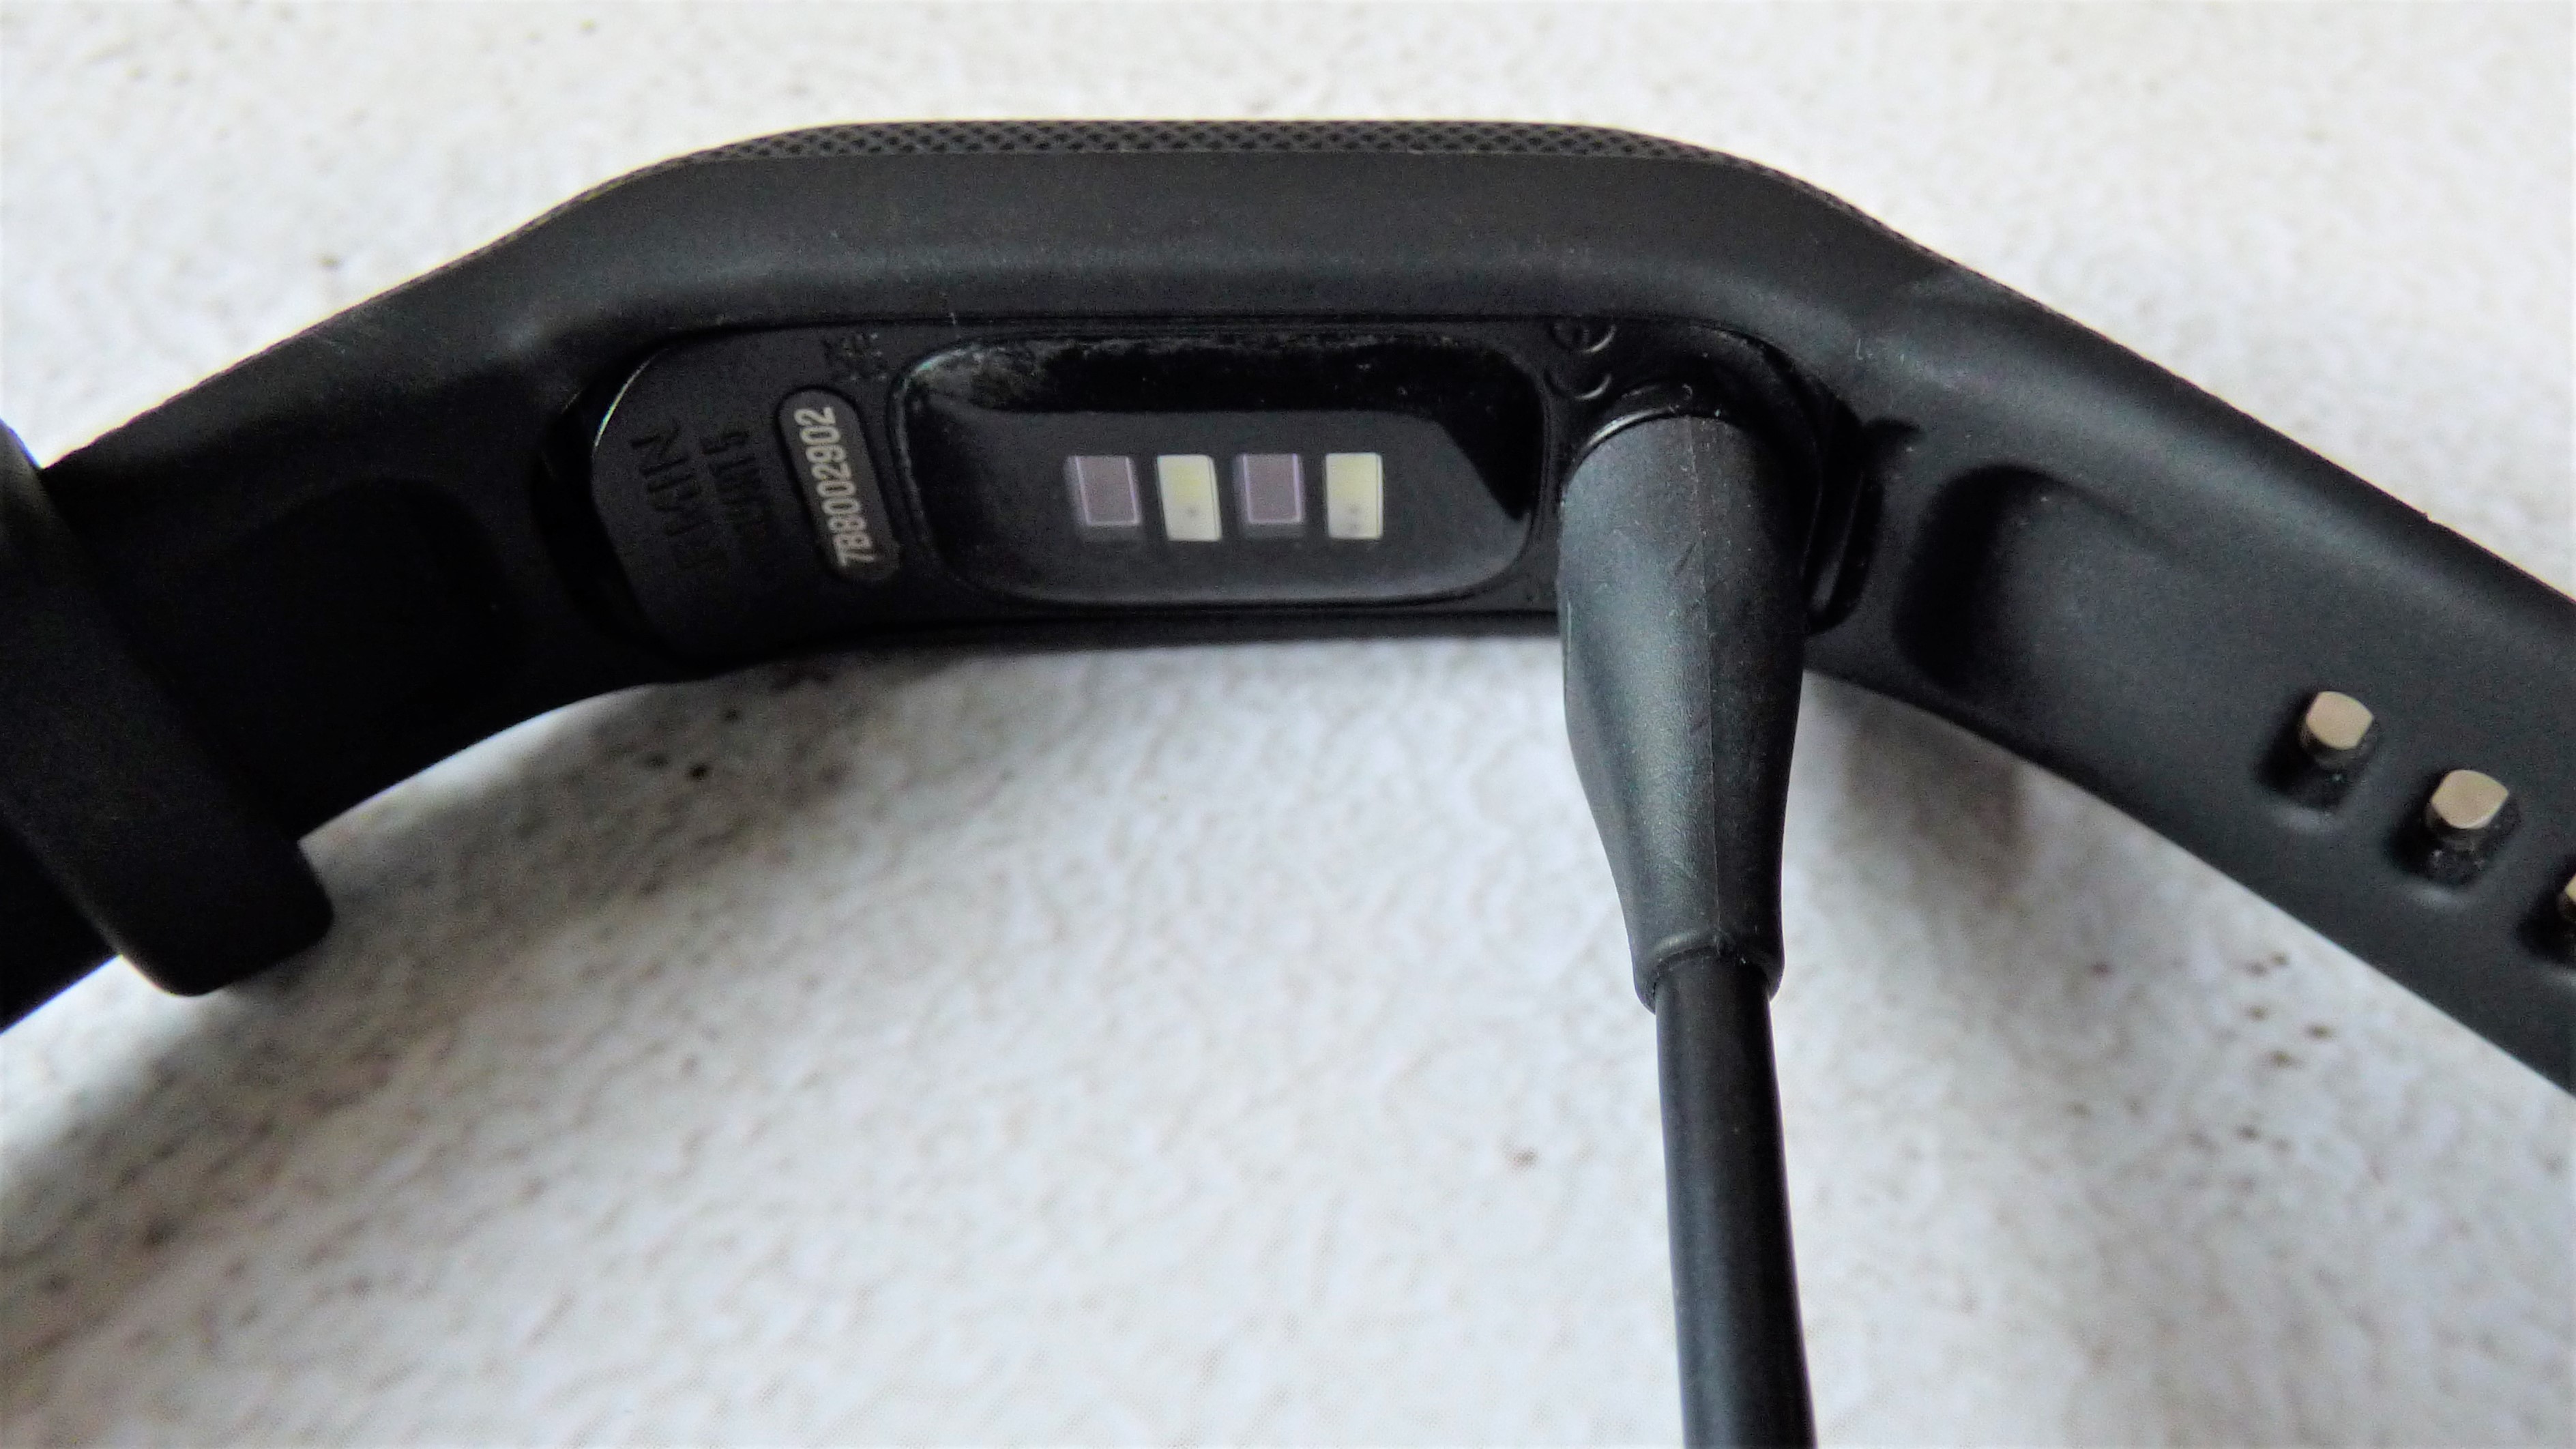 Garmin Vivosmart 5 connected to charging cable